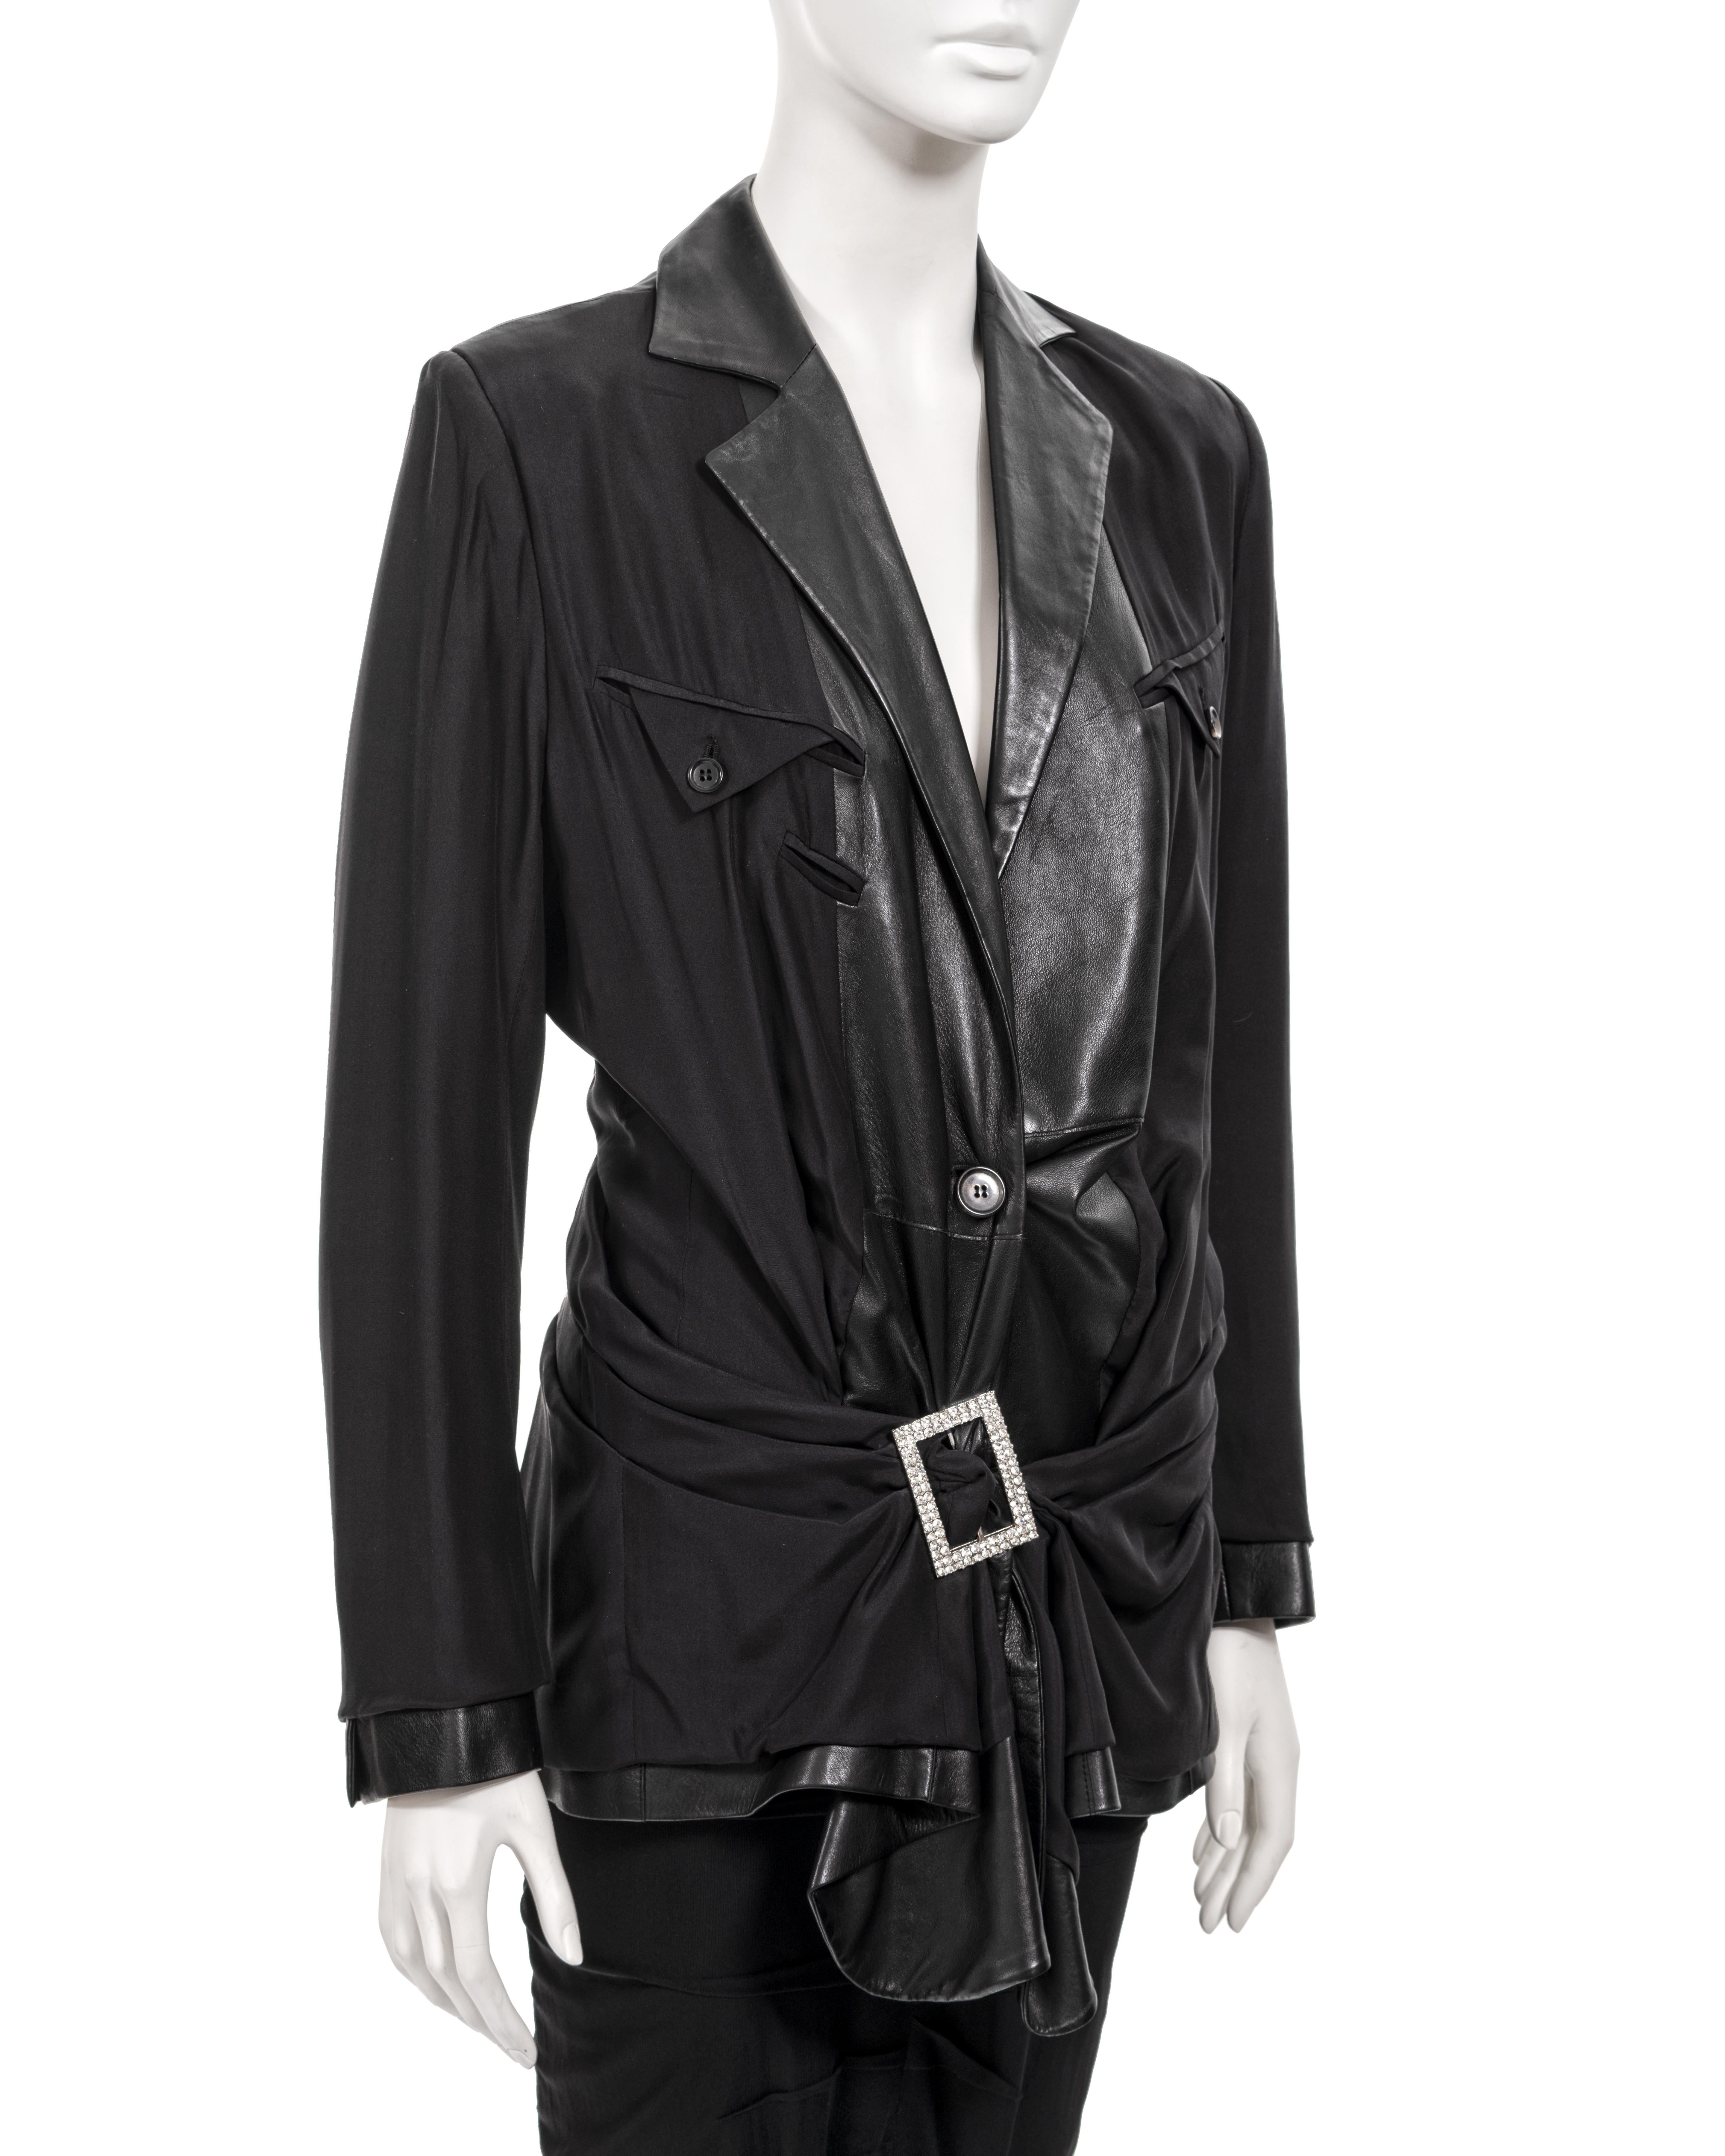 Christian Dior by John Galliano inside-out leather jacket and skirt set, ss 2003 For Sale 5